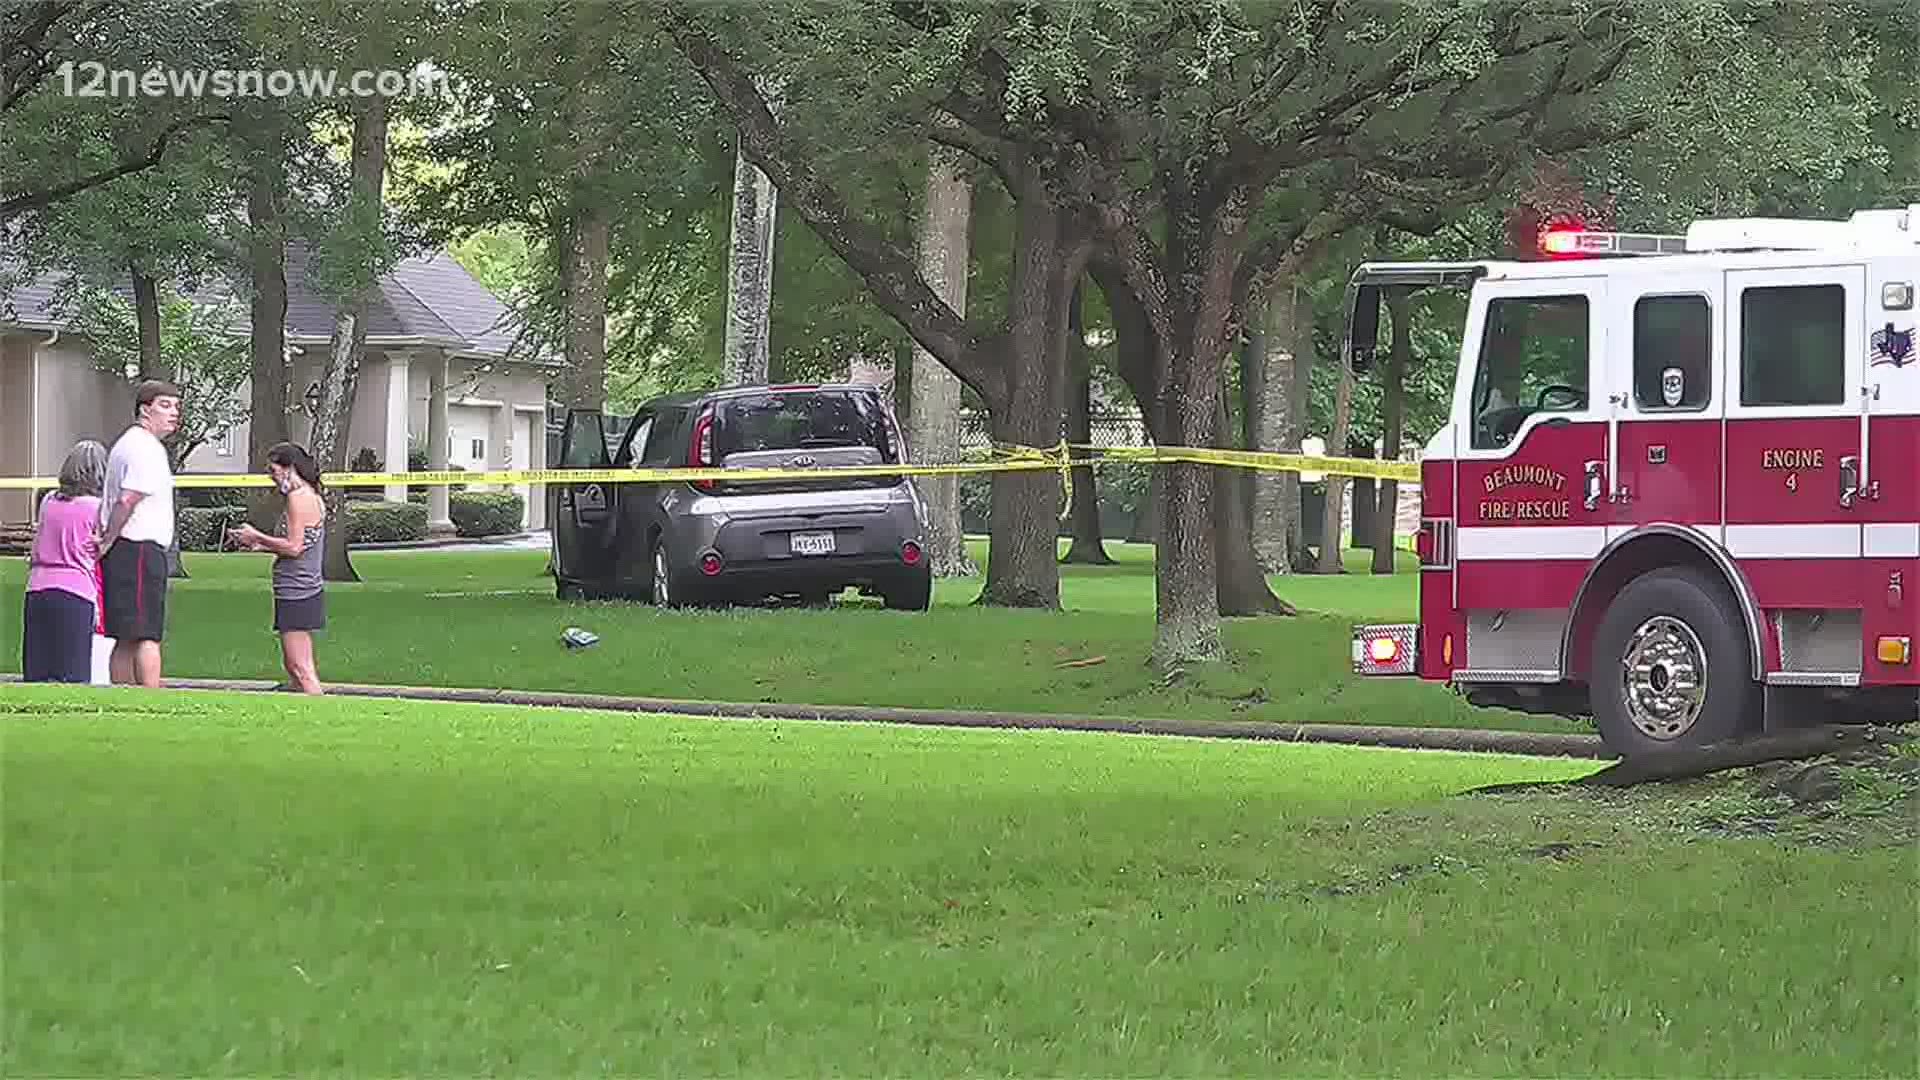 The incident happened on Oak Trace near Delaware in Beaumont